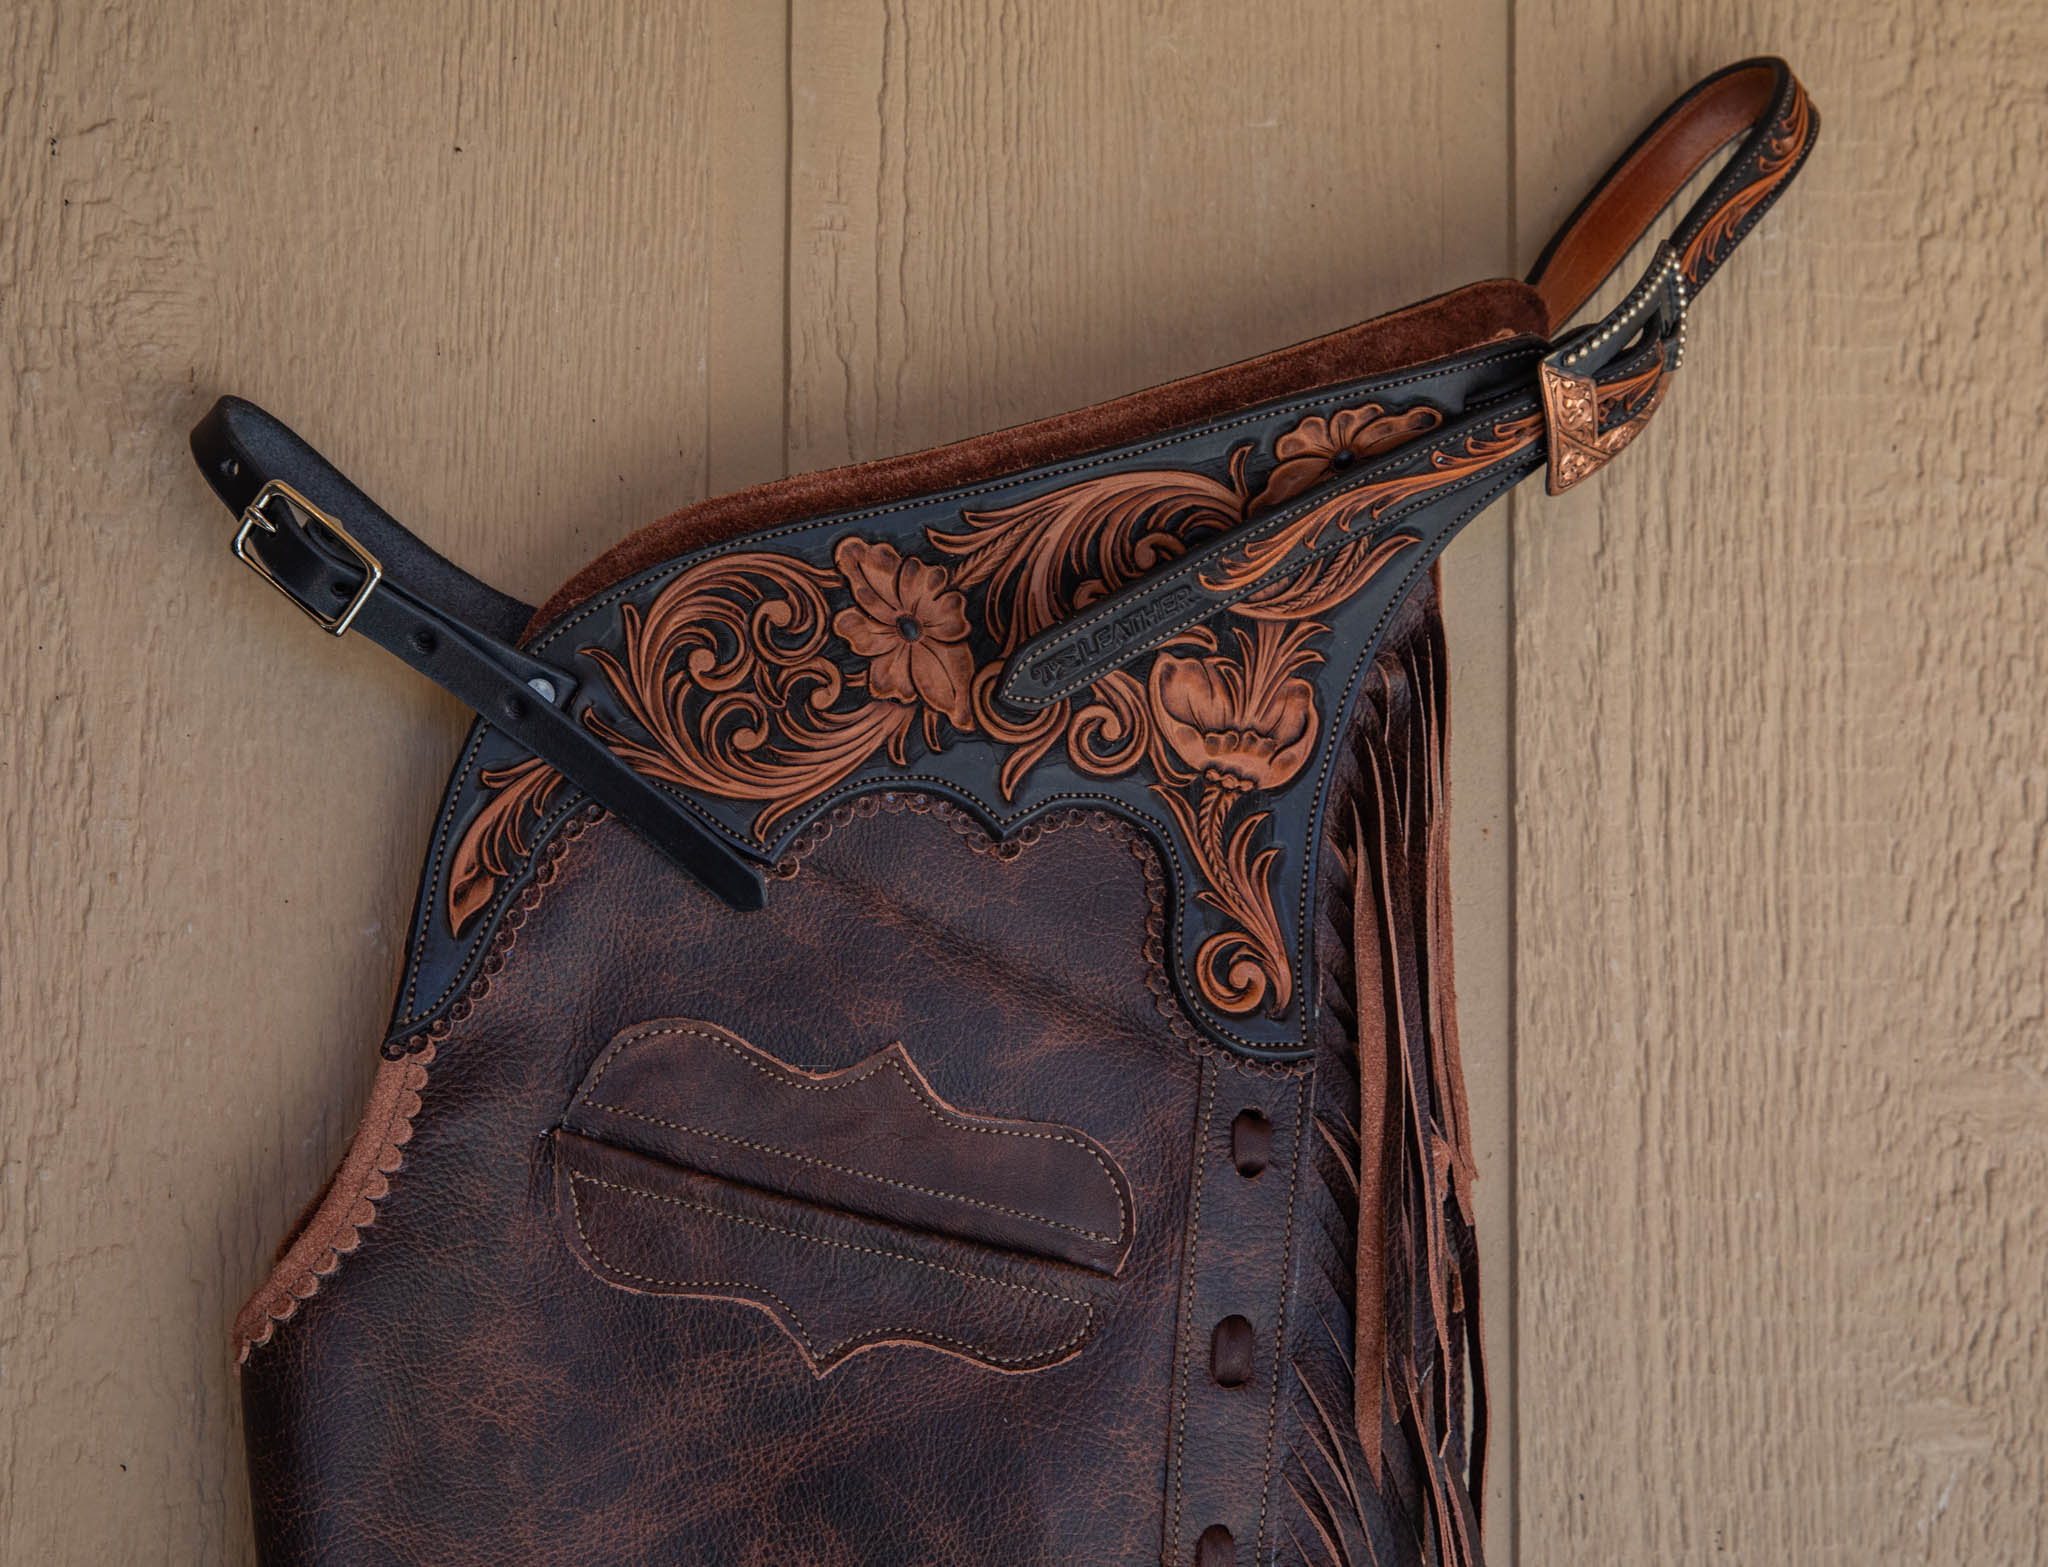 Dark Brown Smooth-out Chaps w/ Black & Light Brown Floral Yokes and Pocket